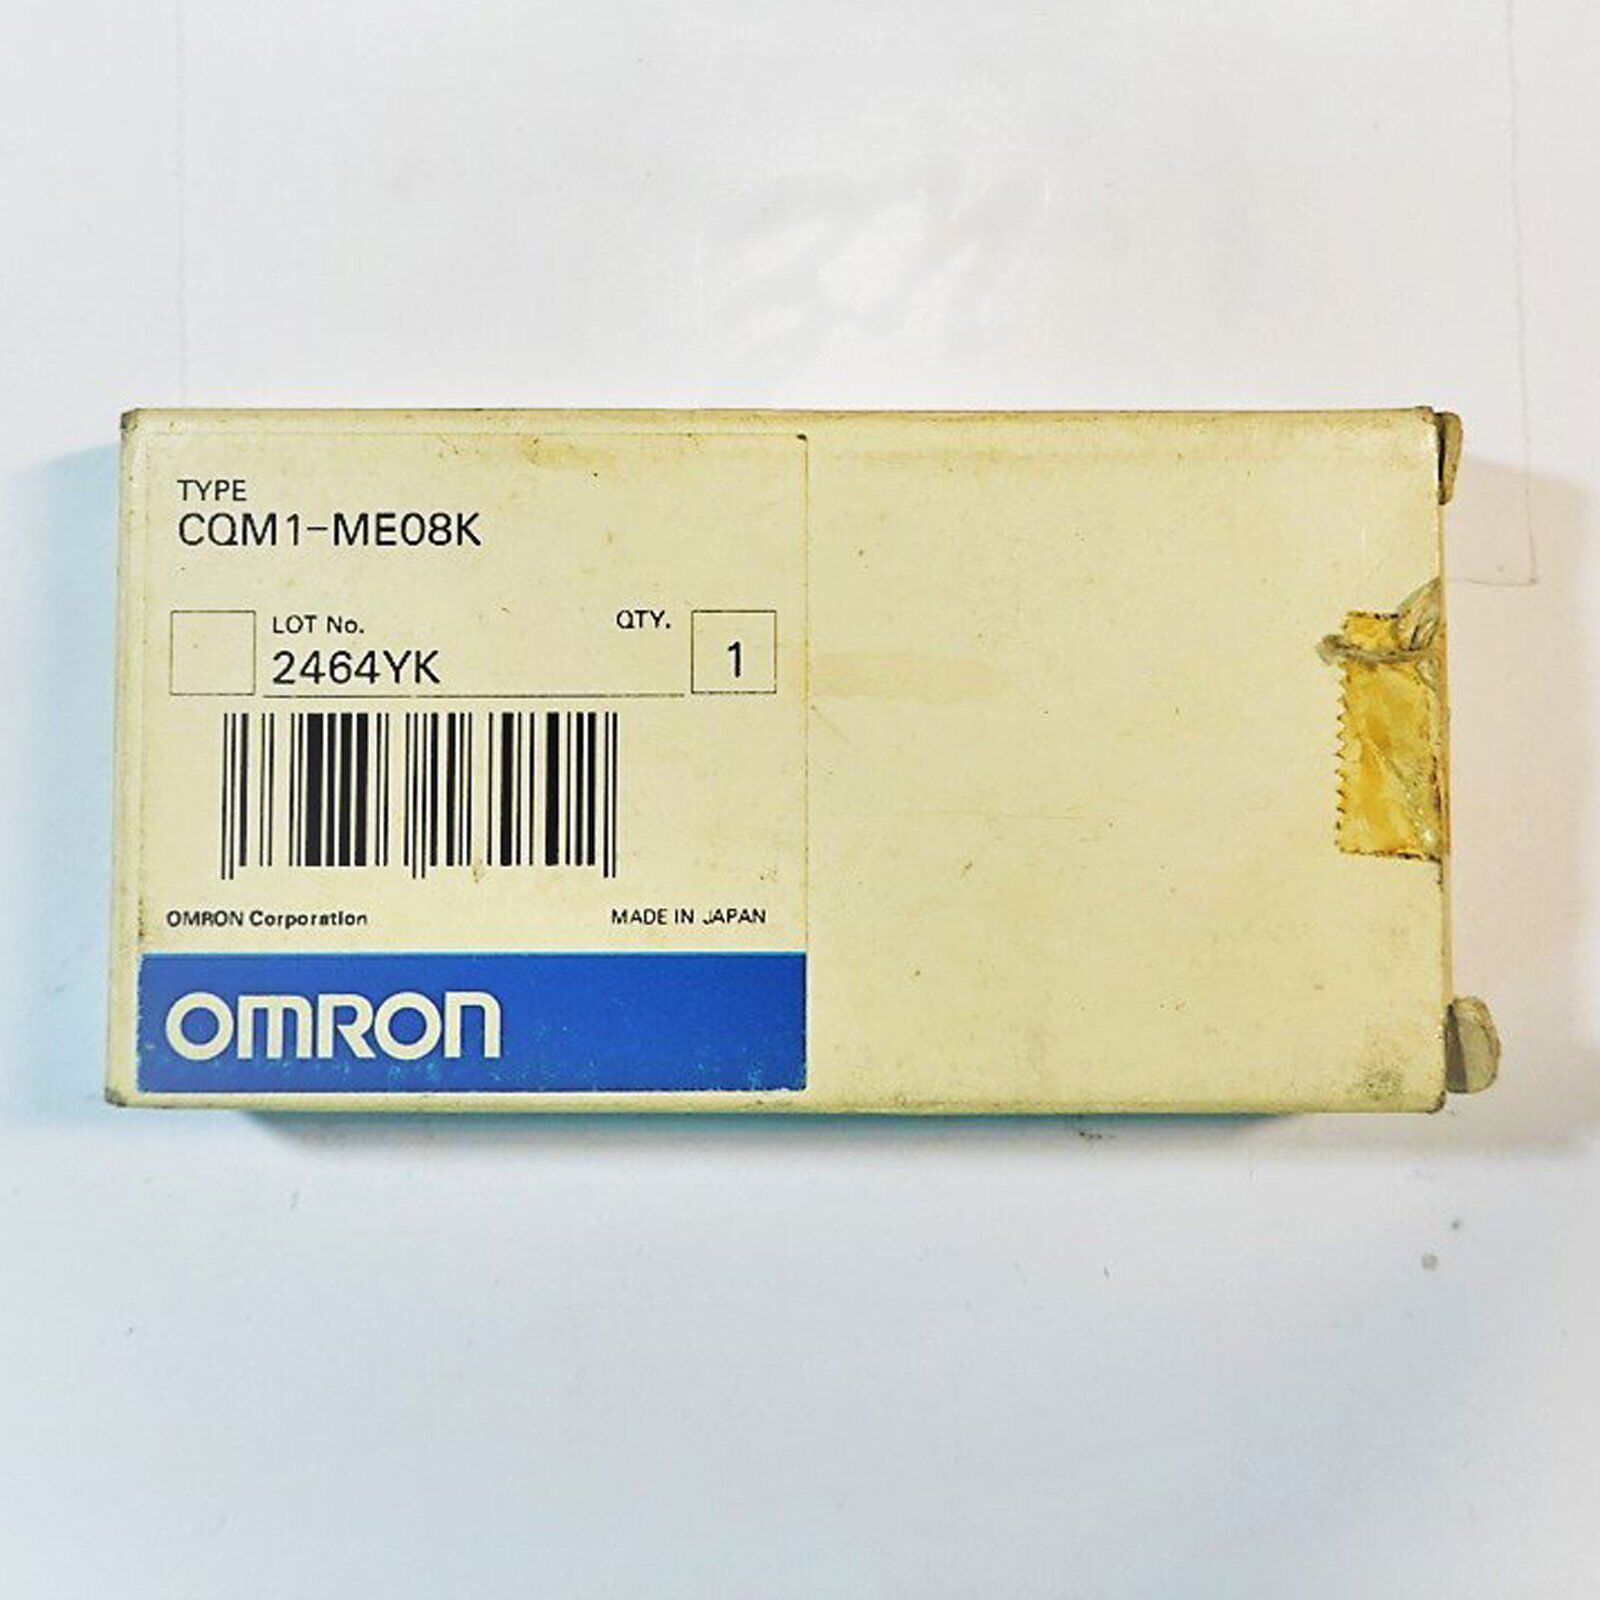 OMRON PLC CQM1-ME08K WITH ONE YEAR WARRANTY FAST SHIPPING 1PCS NIB